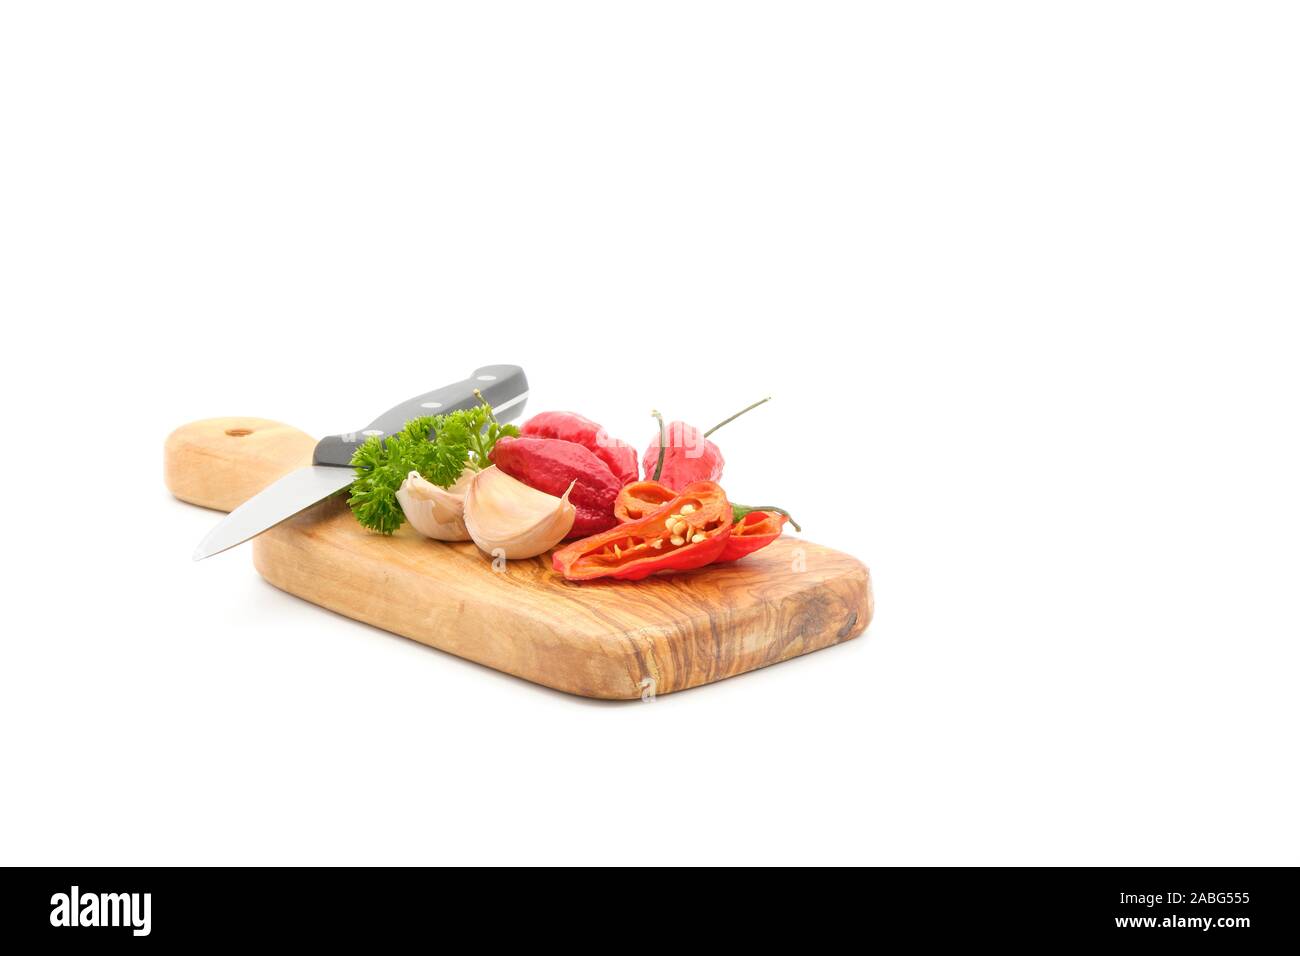 Several ingredients required for making homemade chili including red chilis, garlic and parsley lay on a wooden cutting board photographed on a white Stock Photo